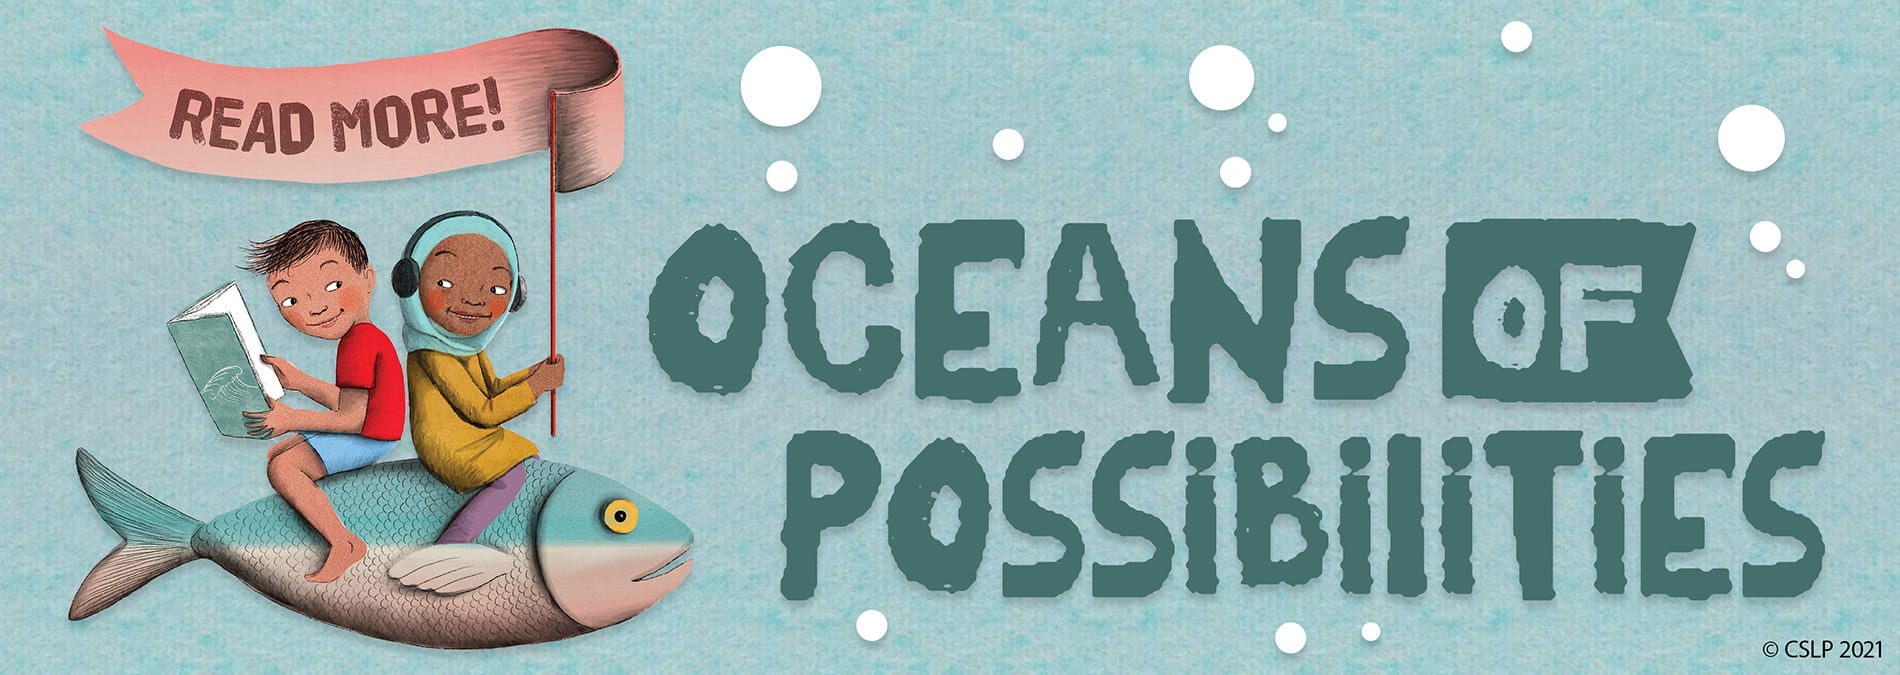 Decorative banner with two children reading books while riding a fish and holding a banner saying "Read More". Main text reads "Oceans of Possibilities"